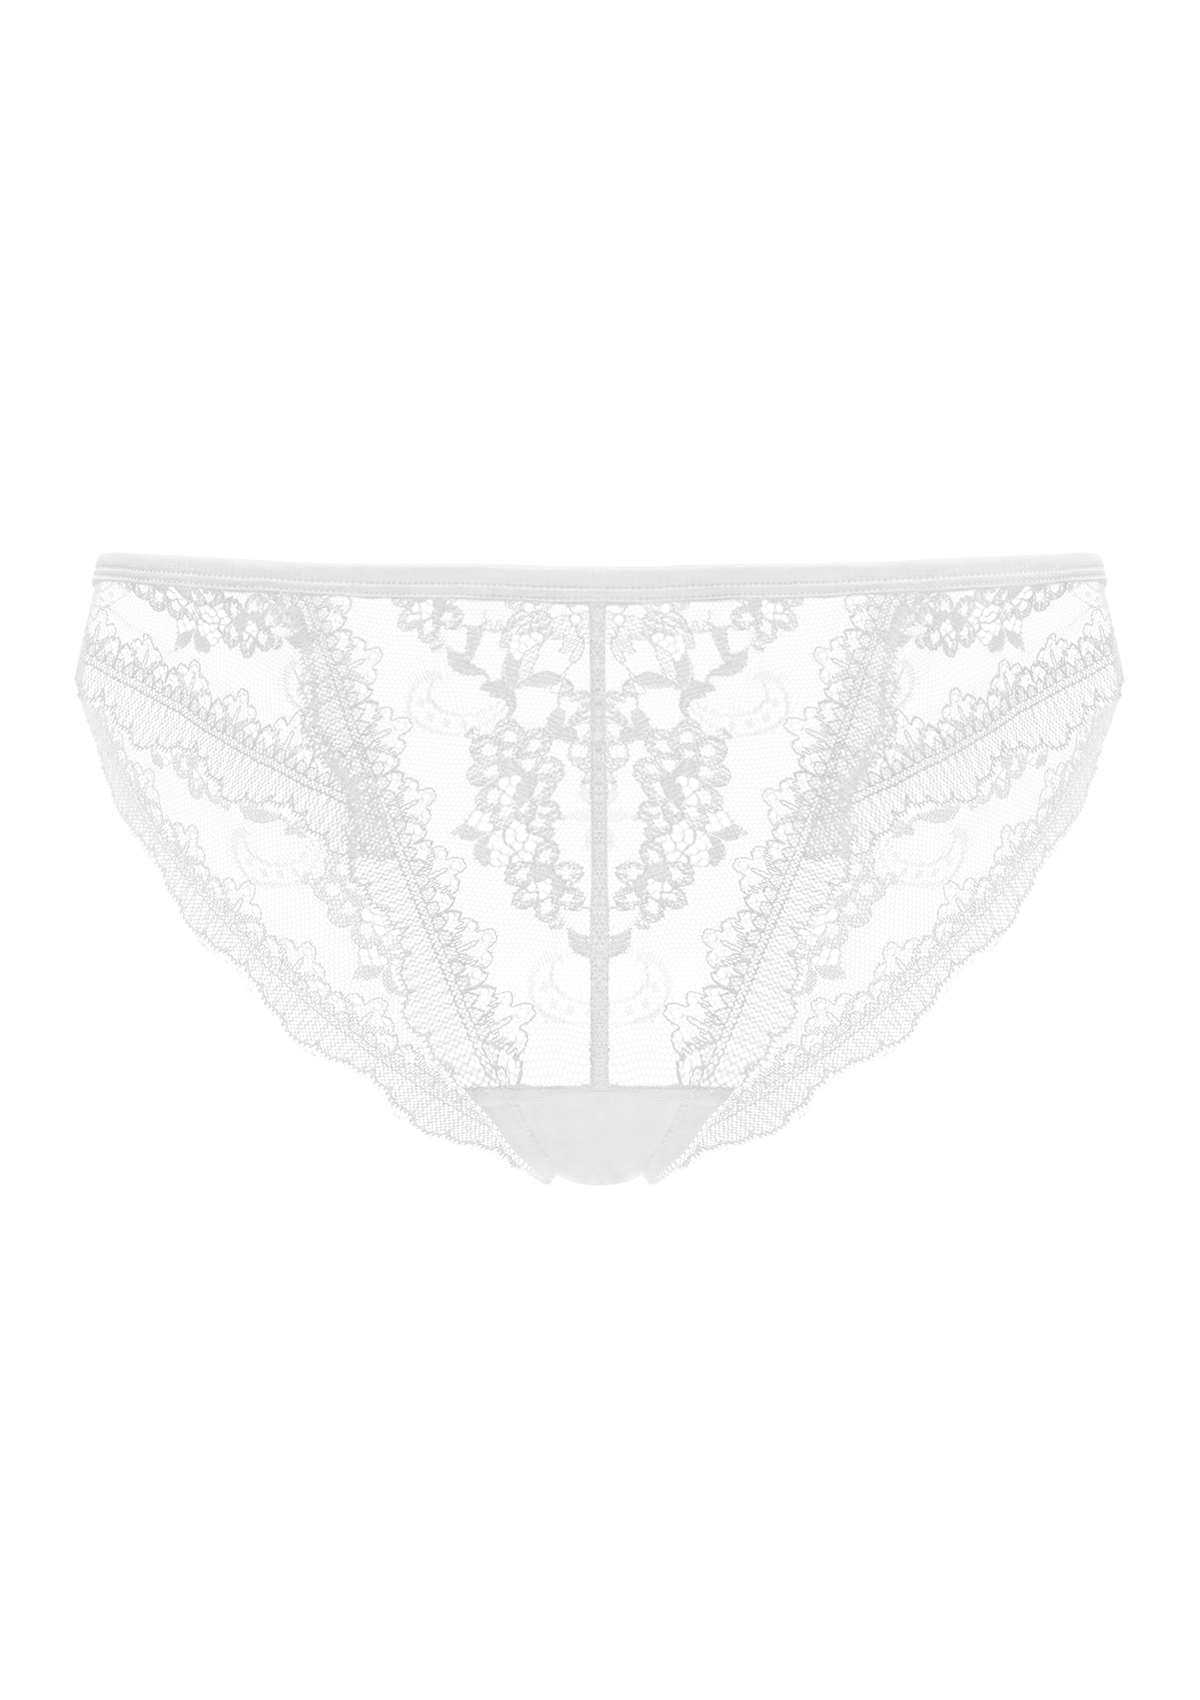 HSIA Floral Bridal Lace Back Intricate Stylish Cheeky Underwear  - White / M